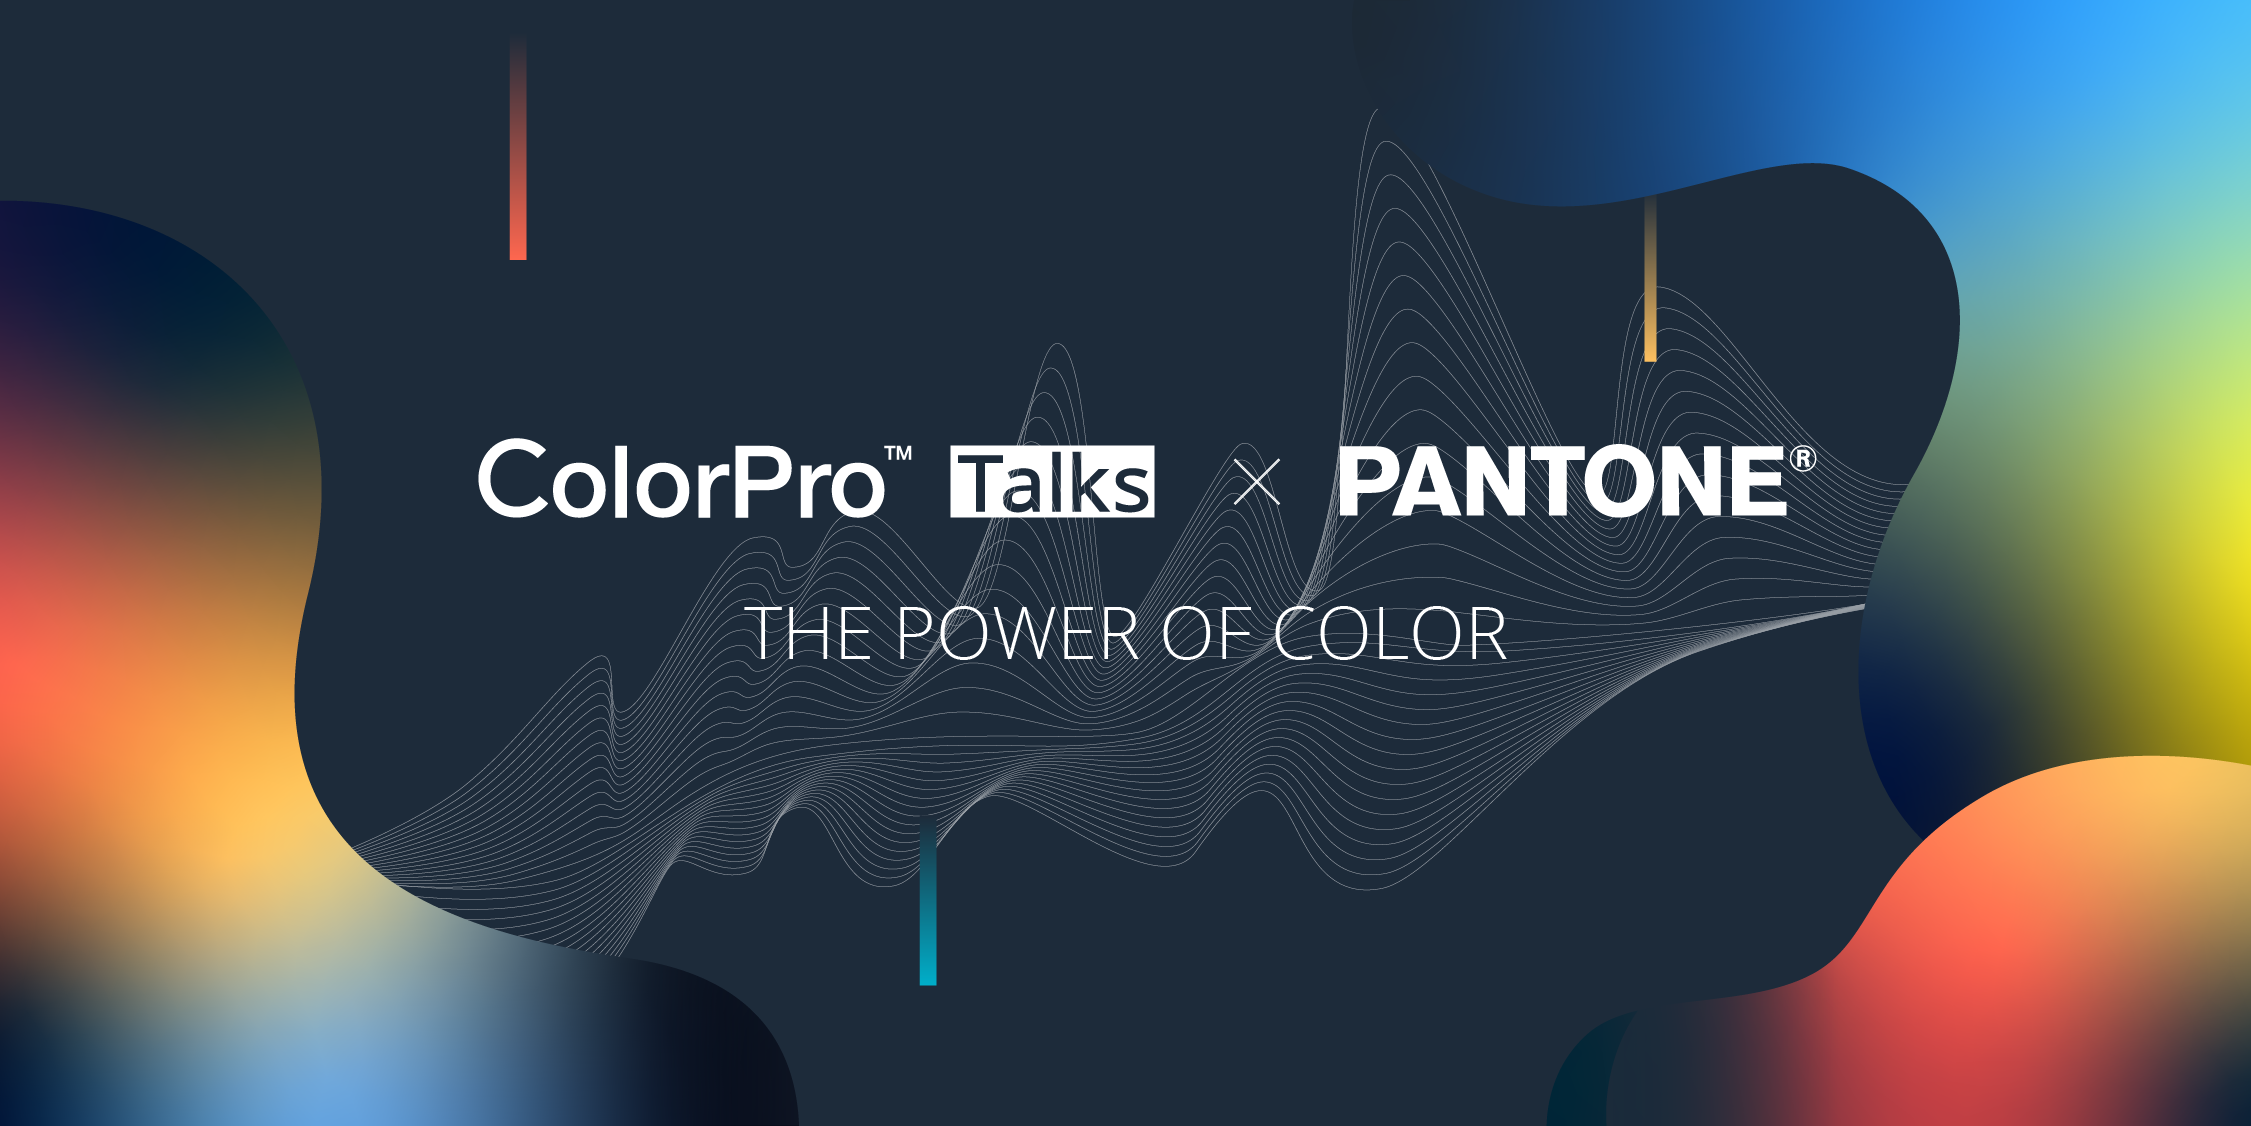 ViewSonic Announces Exclusive Partnership with Pantone, ColorPro Talks –  The Power of Color”